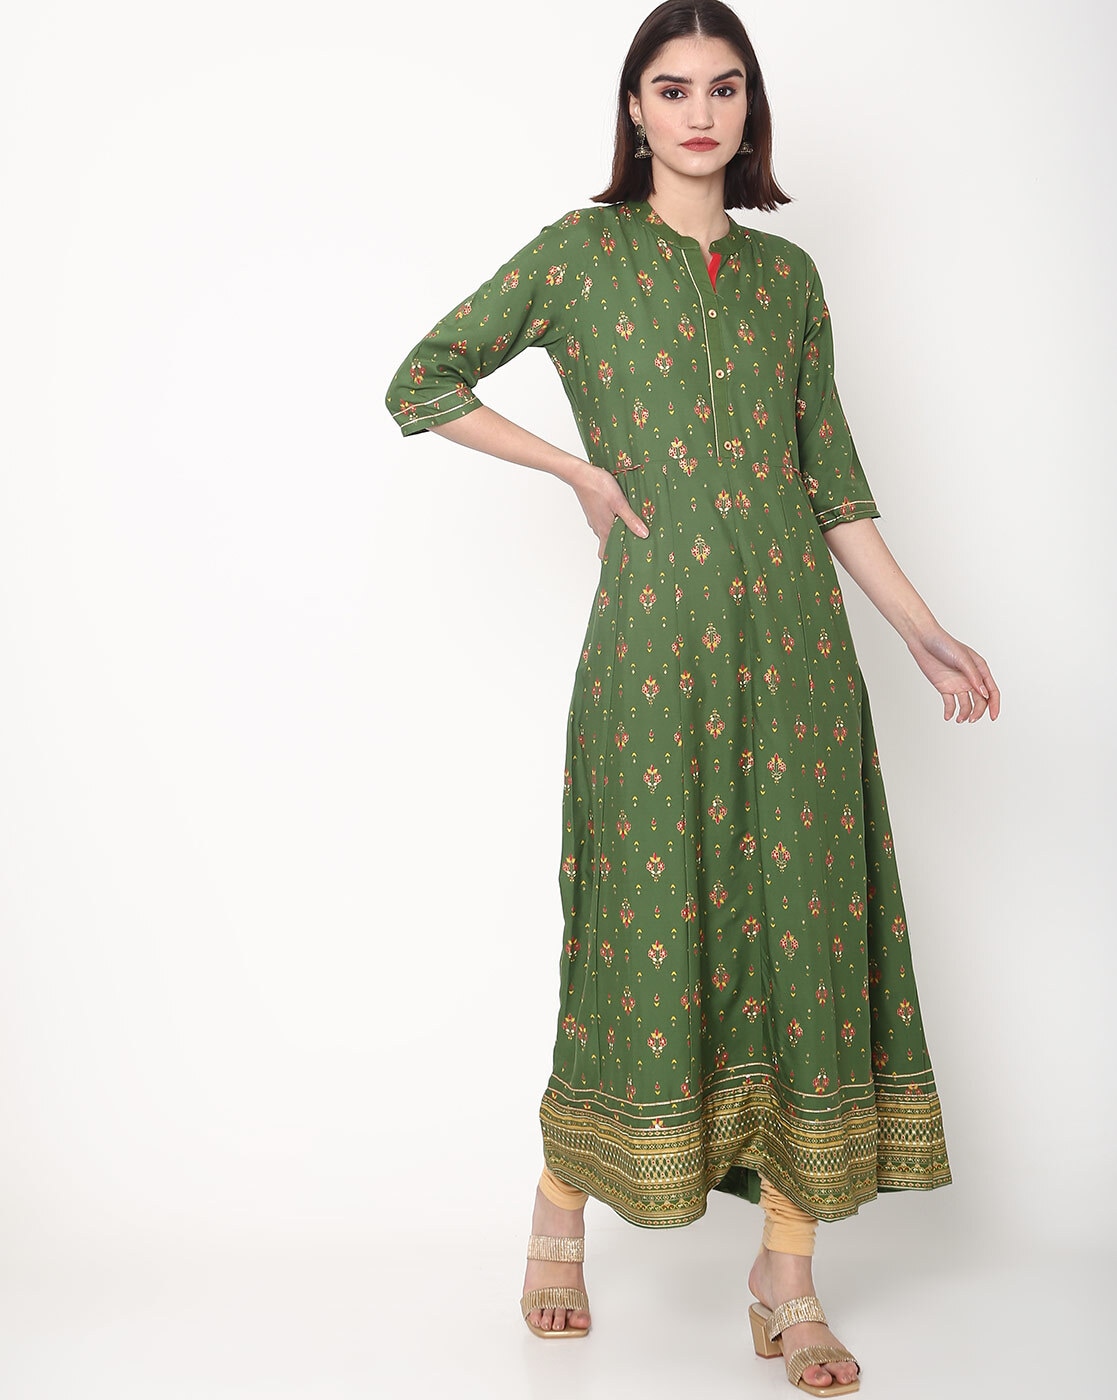 Discover 154+ trends latest kurti collection - netgroup.edu.vn